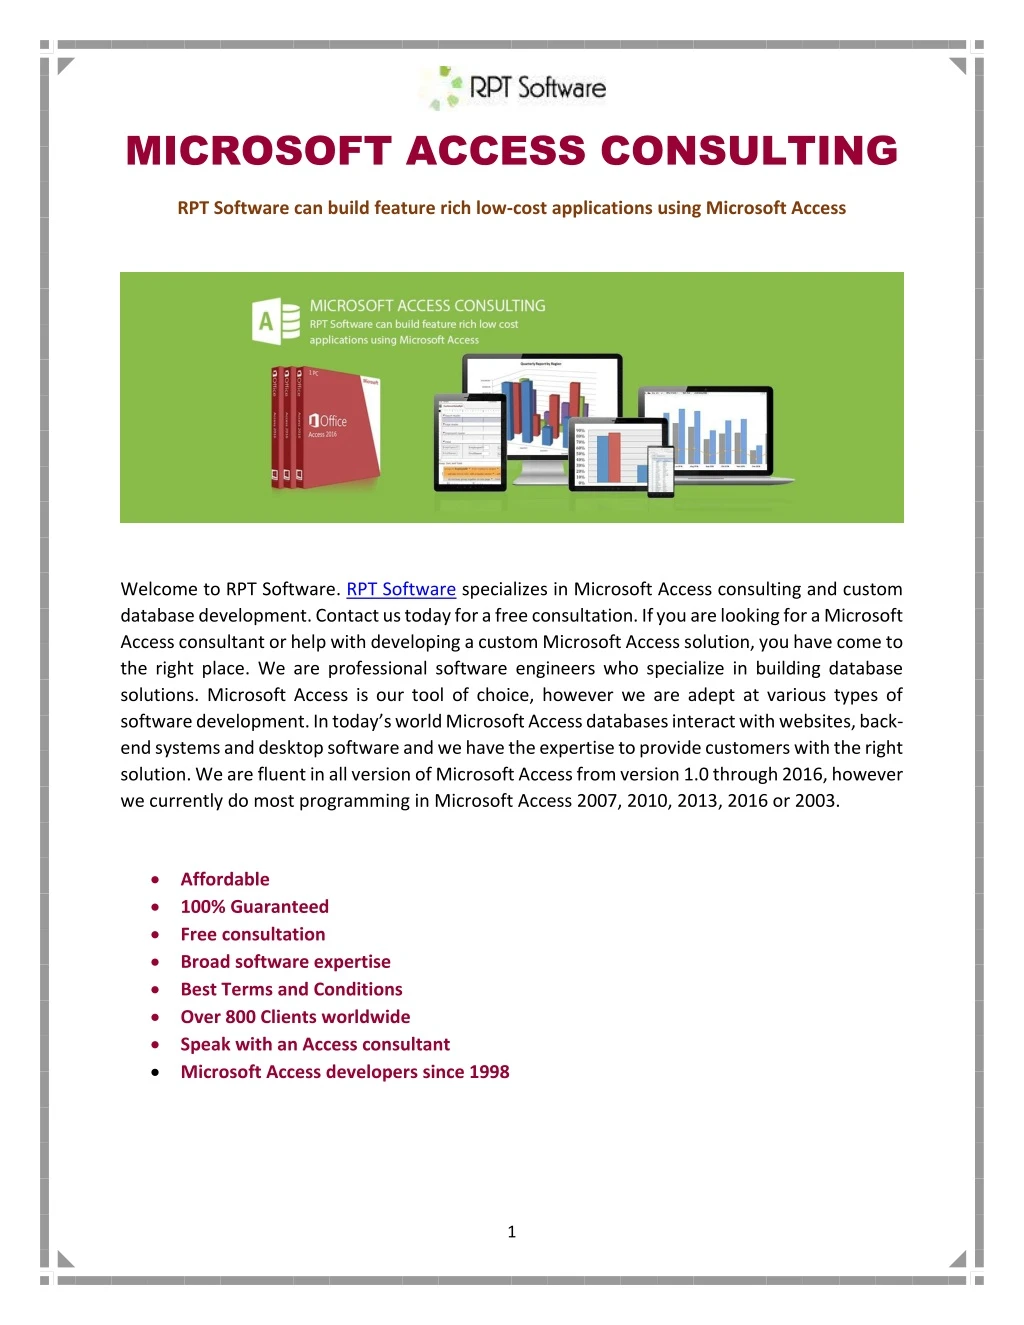 microsoft access consulting